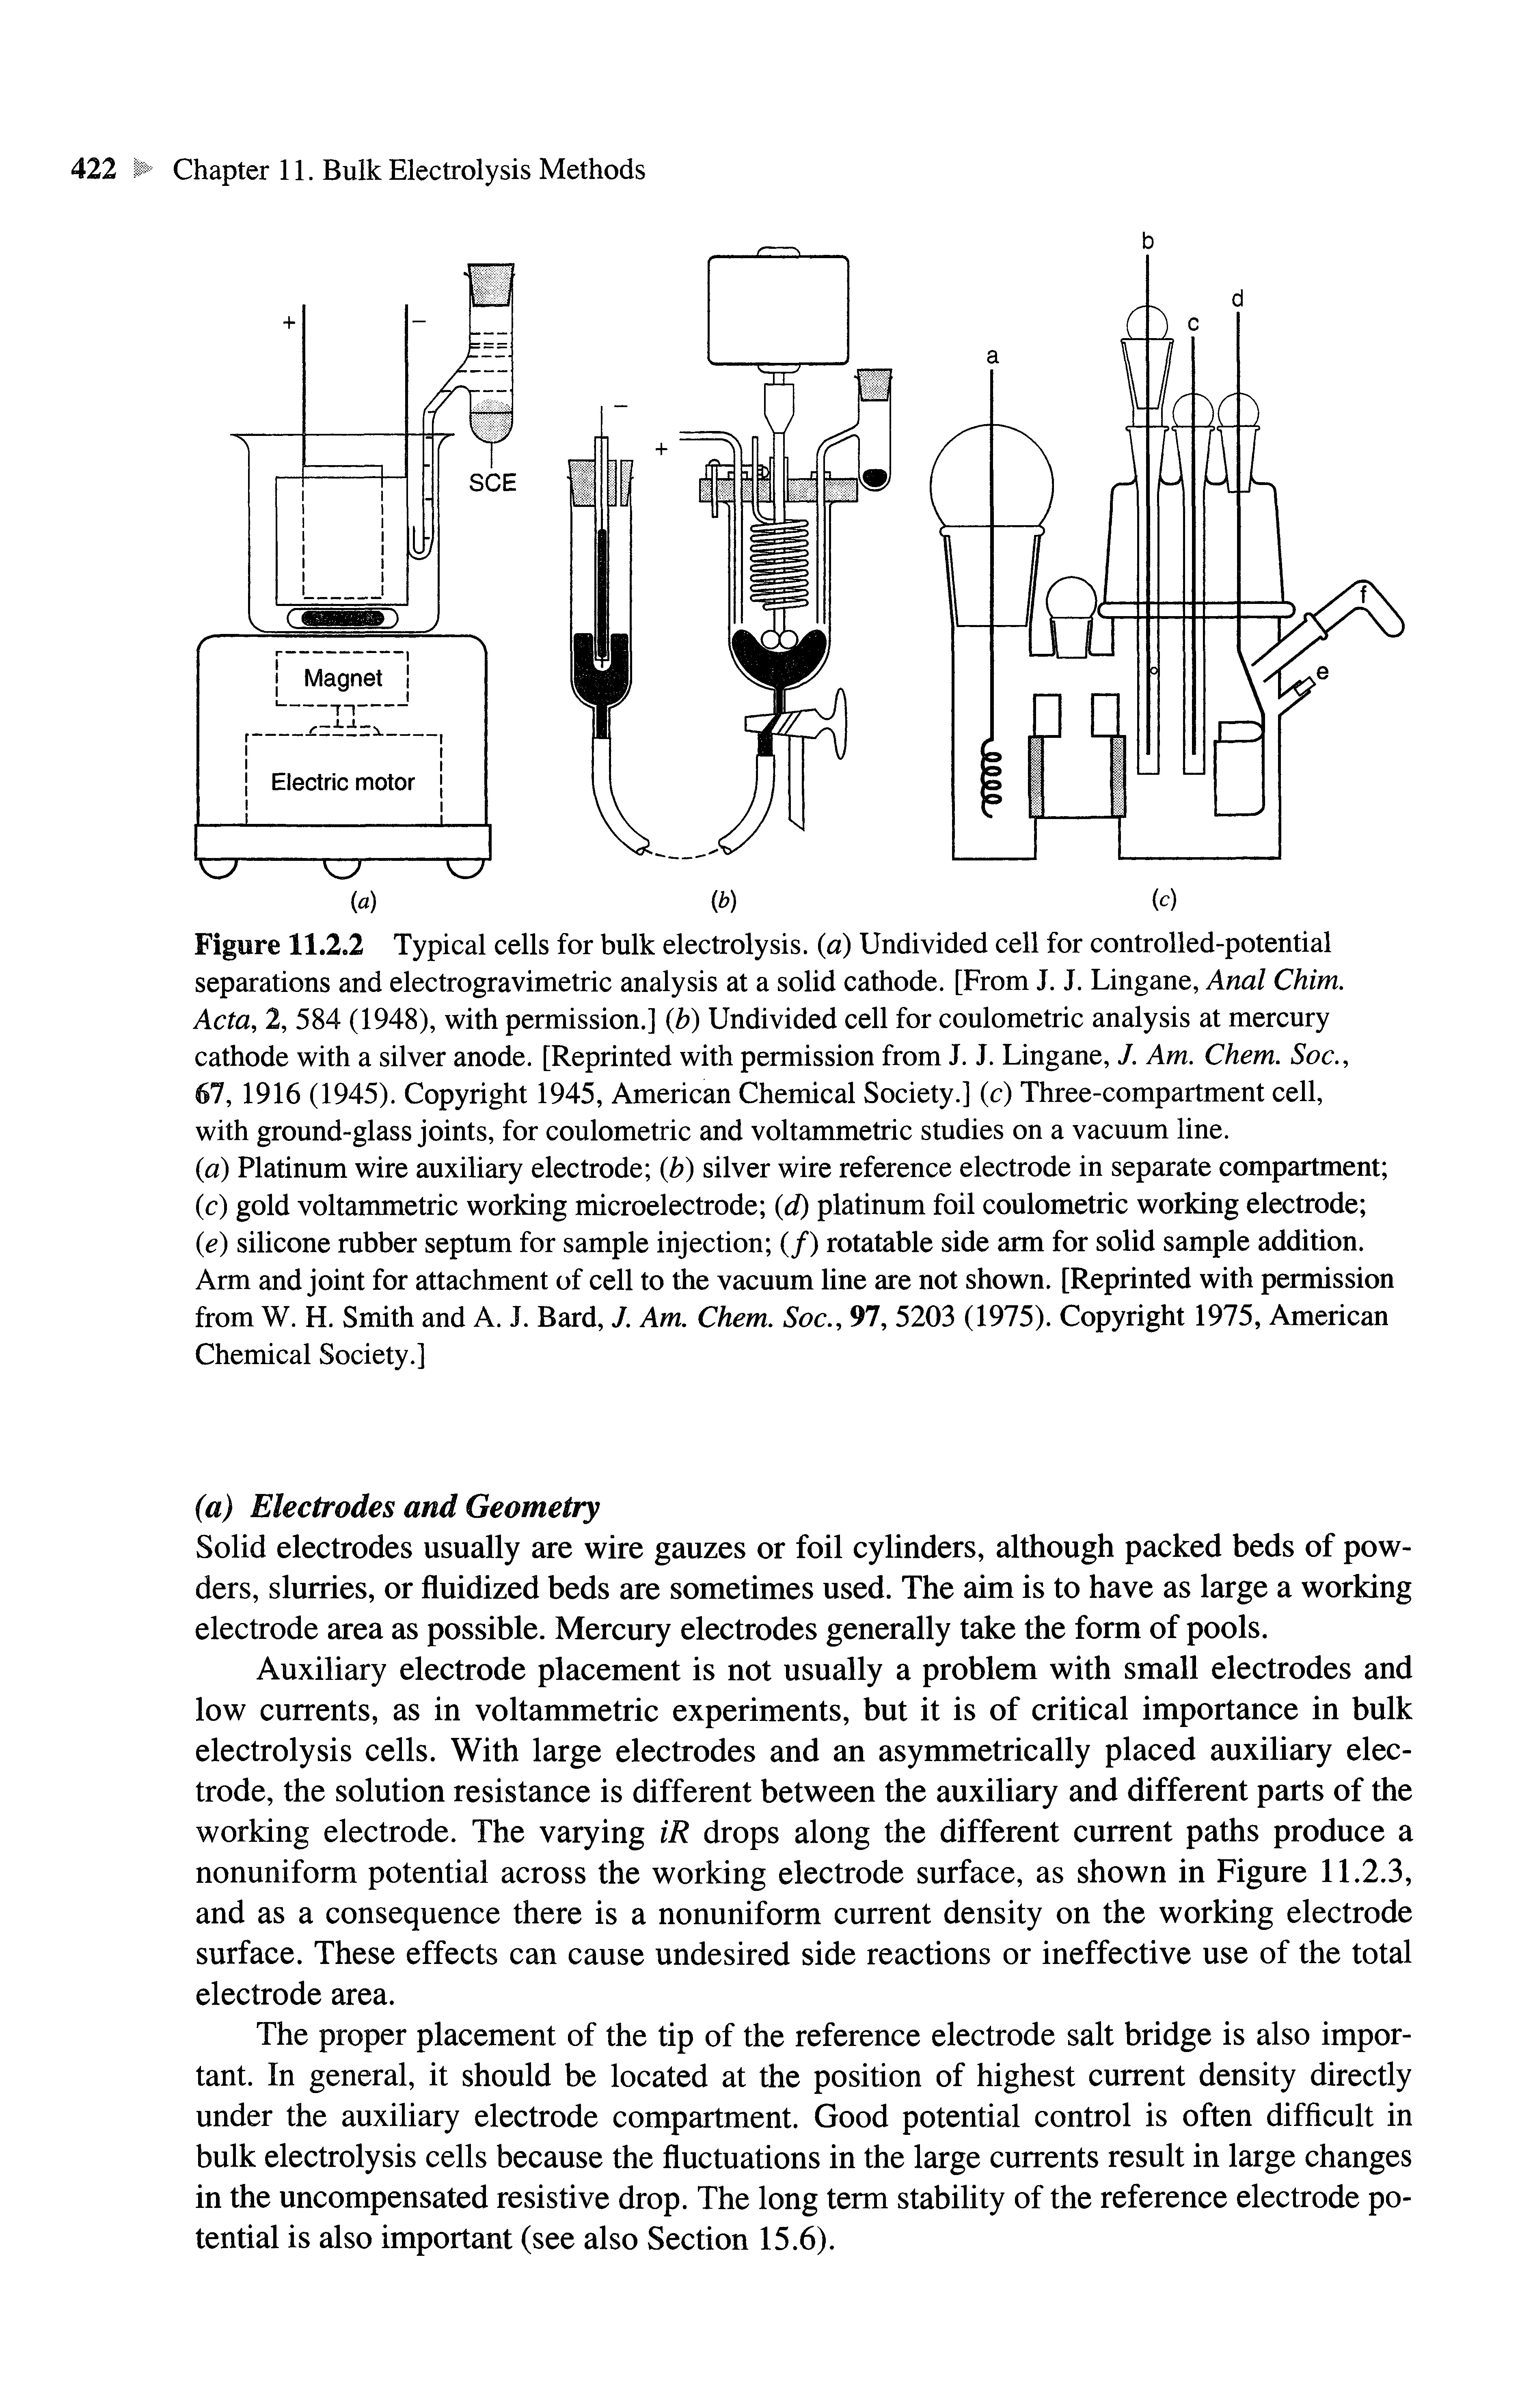 Figure 11.2.2 Typical cells for bulk electrolysis, (a) Undivided cell for controlled-potential separations and electrogravimetric analysis at a solid cathode. [From J. J. Lingane, Anal Chim. Acta, 2, 584 (1948), with permission.] ib) Undivided cell for coulometric analysis at mercury cathode with a silver anode. [Reprinted with permission from J. J. Lingane, J. Am. Chem. Soc.,...